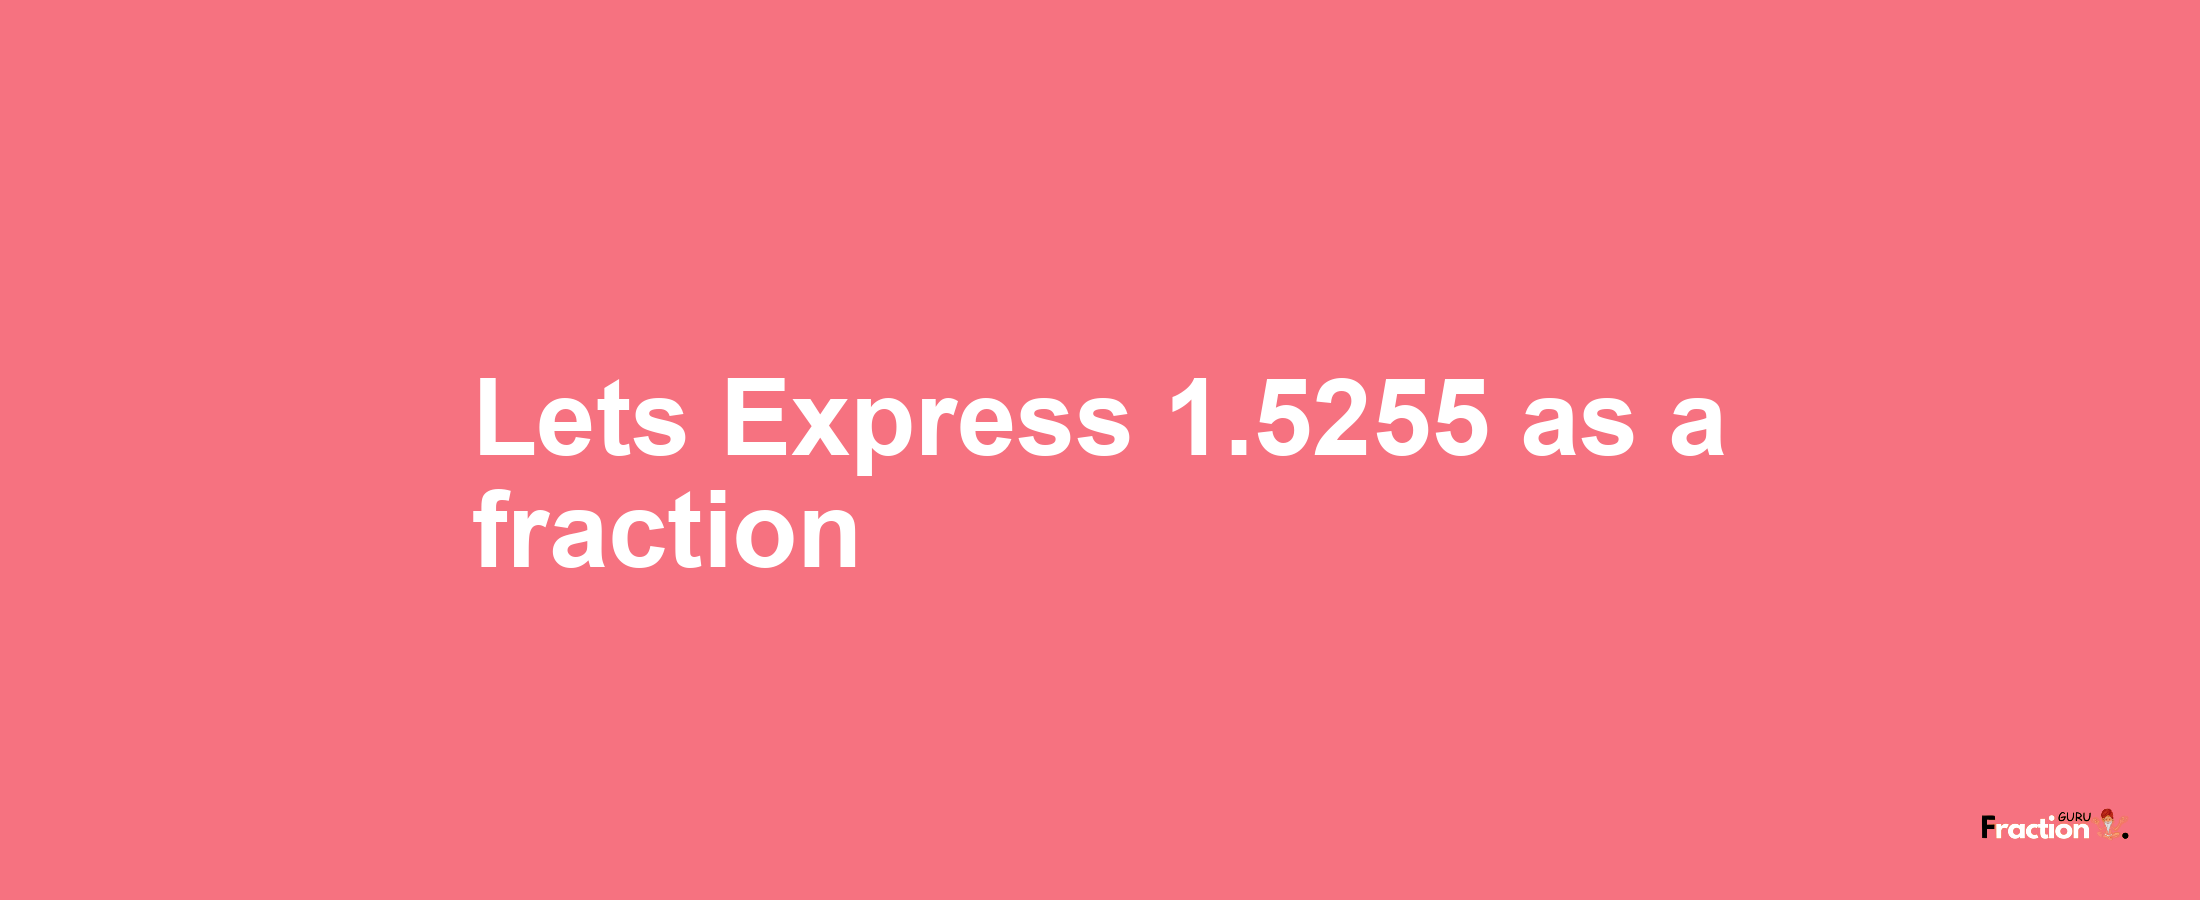 Lets Express 1.5255 as afraction